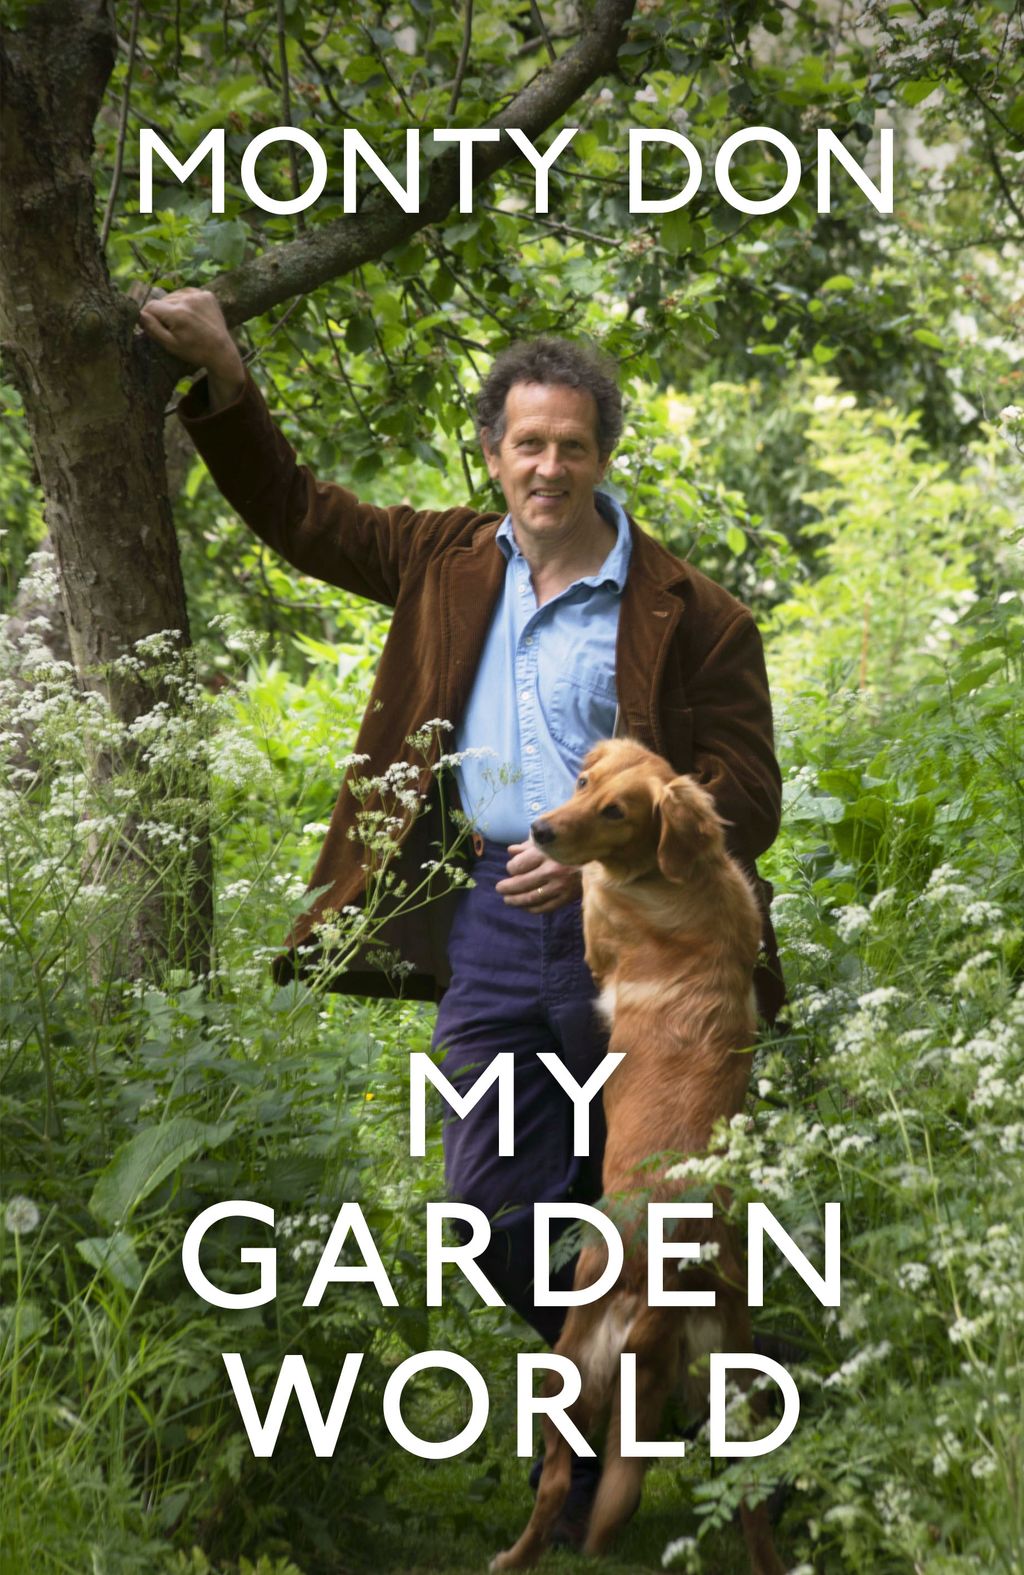 Monty Don's new book is here! We reveal what you can expect inside